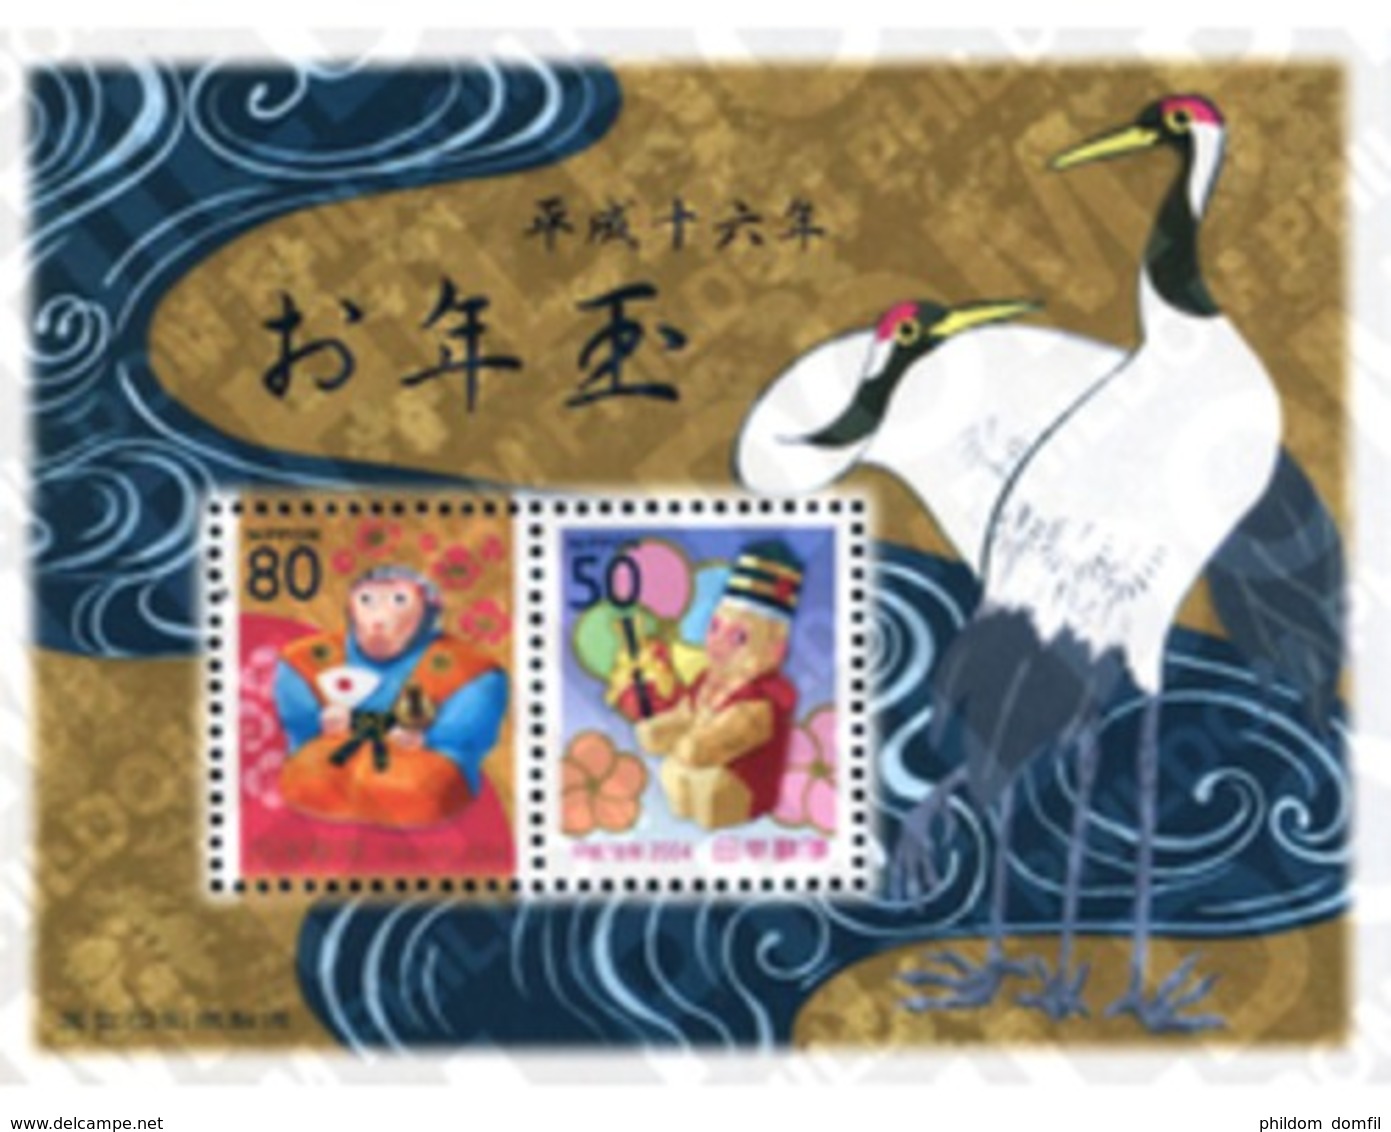 Ref. 154500 * MNH * - JAPAN. 2004. NEW CHINESE YEAR OF THE MONKEY . NUEVO AÑO CHINO DEL MONO - Astrologia